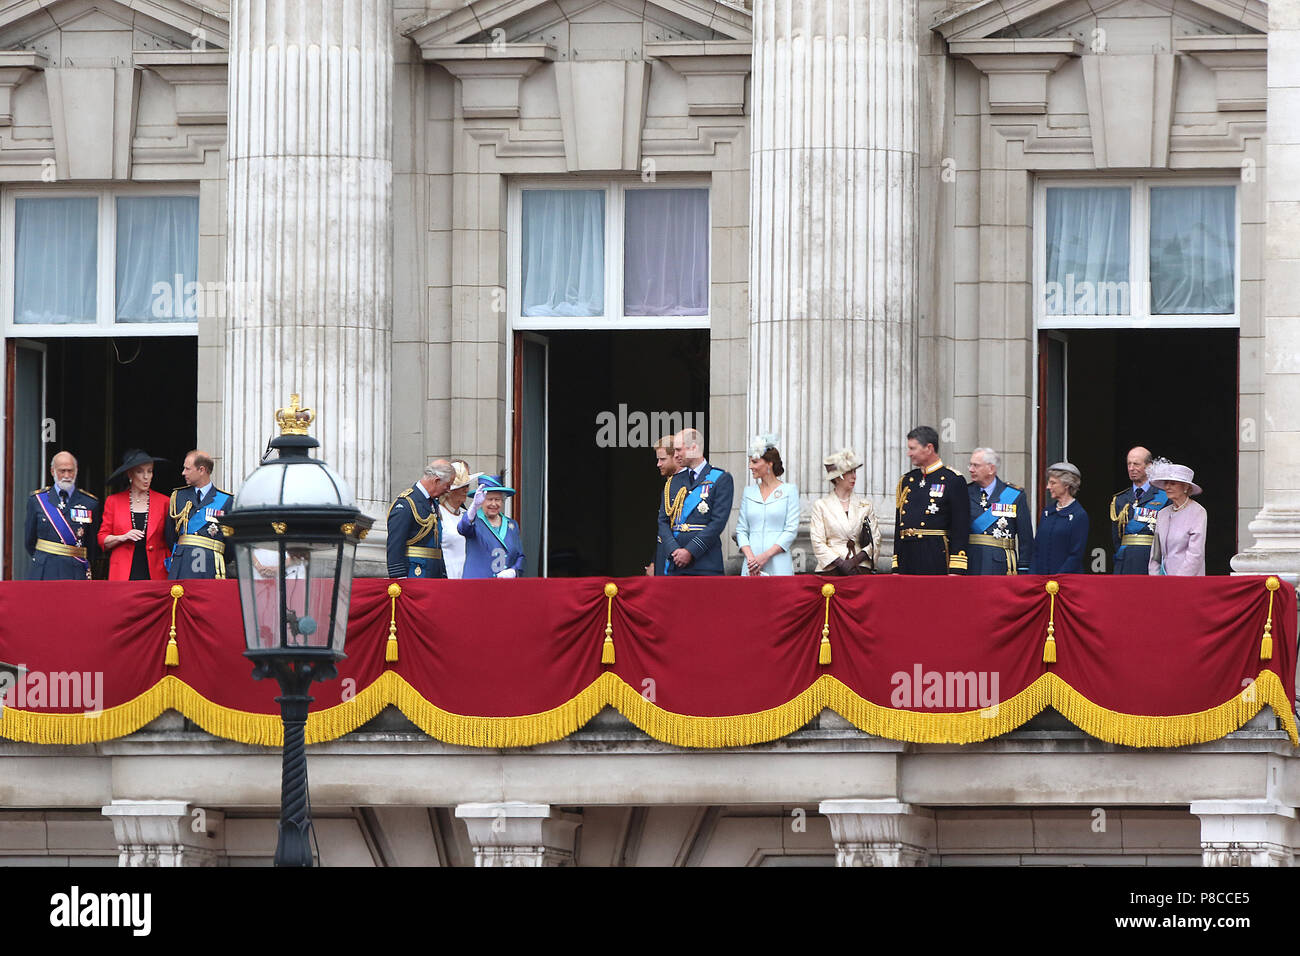 London, UK. 10th July, 2018. Royal Family, Prince Michael of Kent, Princess Michael of Kent, Prince Edward, Charles Prince of Wales, Camilla Duchess of Cornwall, Elizabeth II The Queen, Meghan Duchess of Sussex, Prince Harry Duke of Sussex, Prince William Duke of Cambridge, Catherine Duchess of Cambridge, Anne Princess Royal, Vice Admiral Sir Timothy Laurence, Prince Richard Duke of Gloucester, Birgitte Duchess of Gloucester, Prince Edward Duke of Kent, Katharine Duchess of Kent, RAF100 Parade and Flypast, The Mall & Buckingham Palace, London, UK. Credit: Rich Gold/Alamy Live News Stock Photo